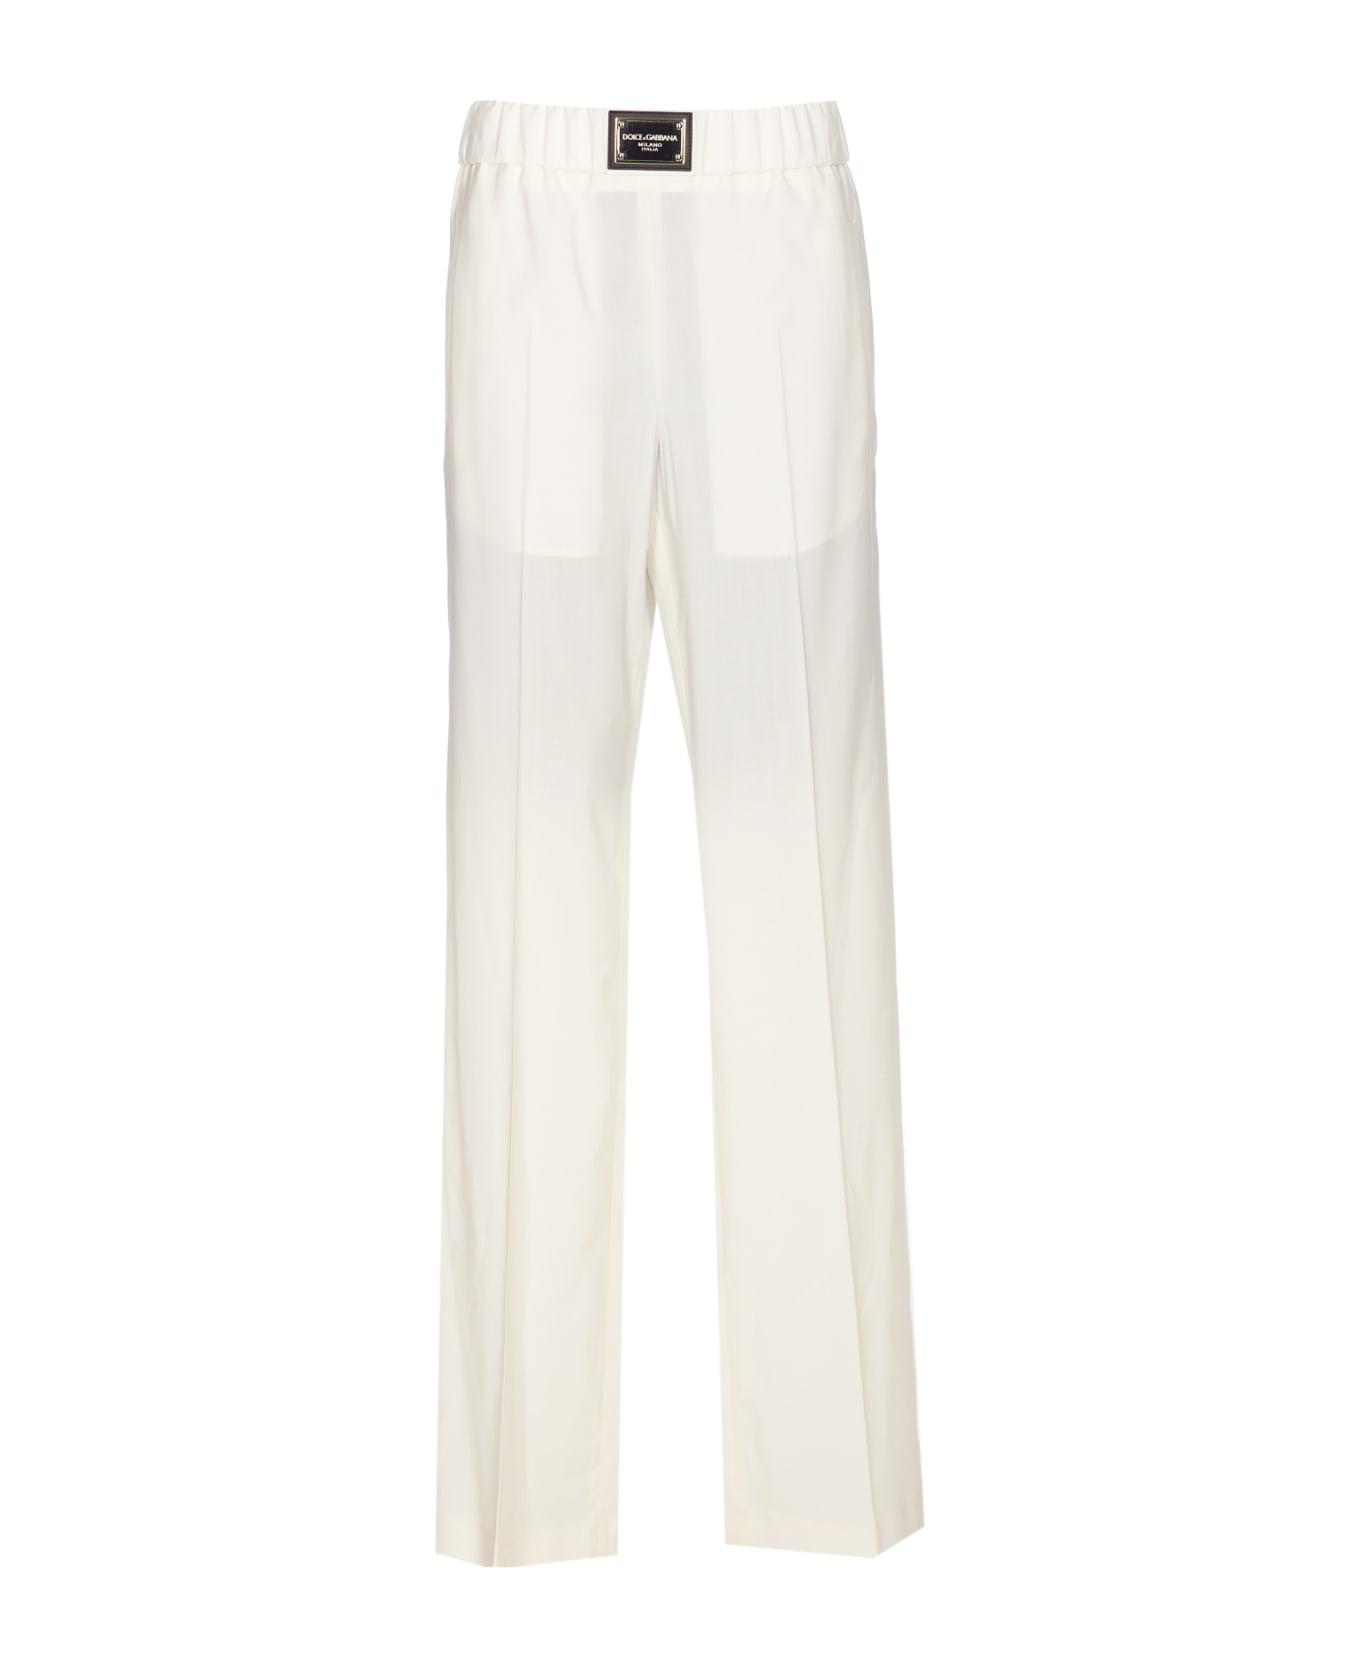 Dolce & Gabbana Flare Trousers - White ボトムス